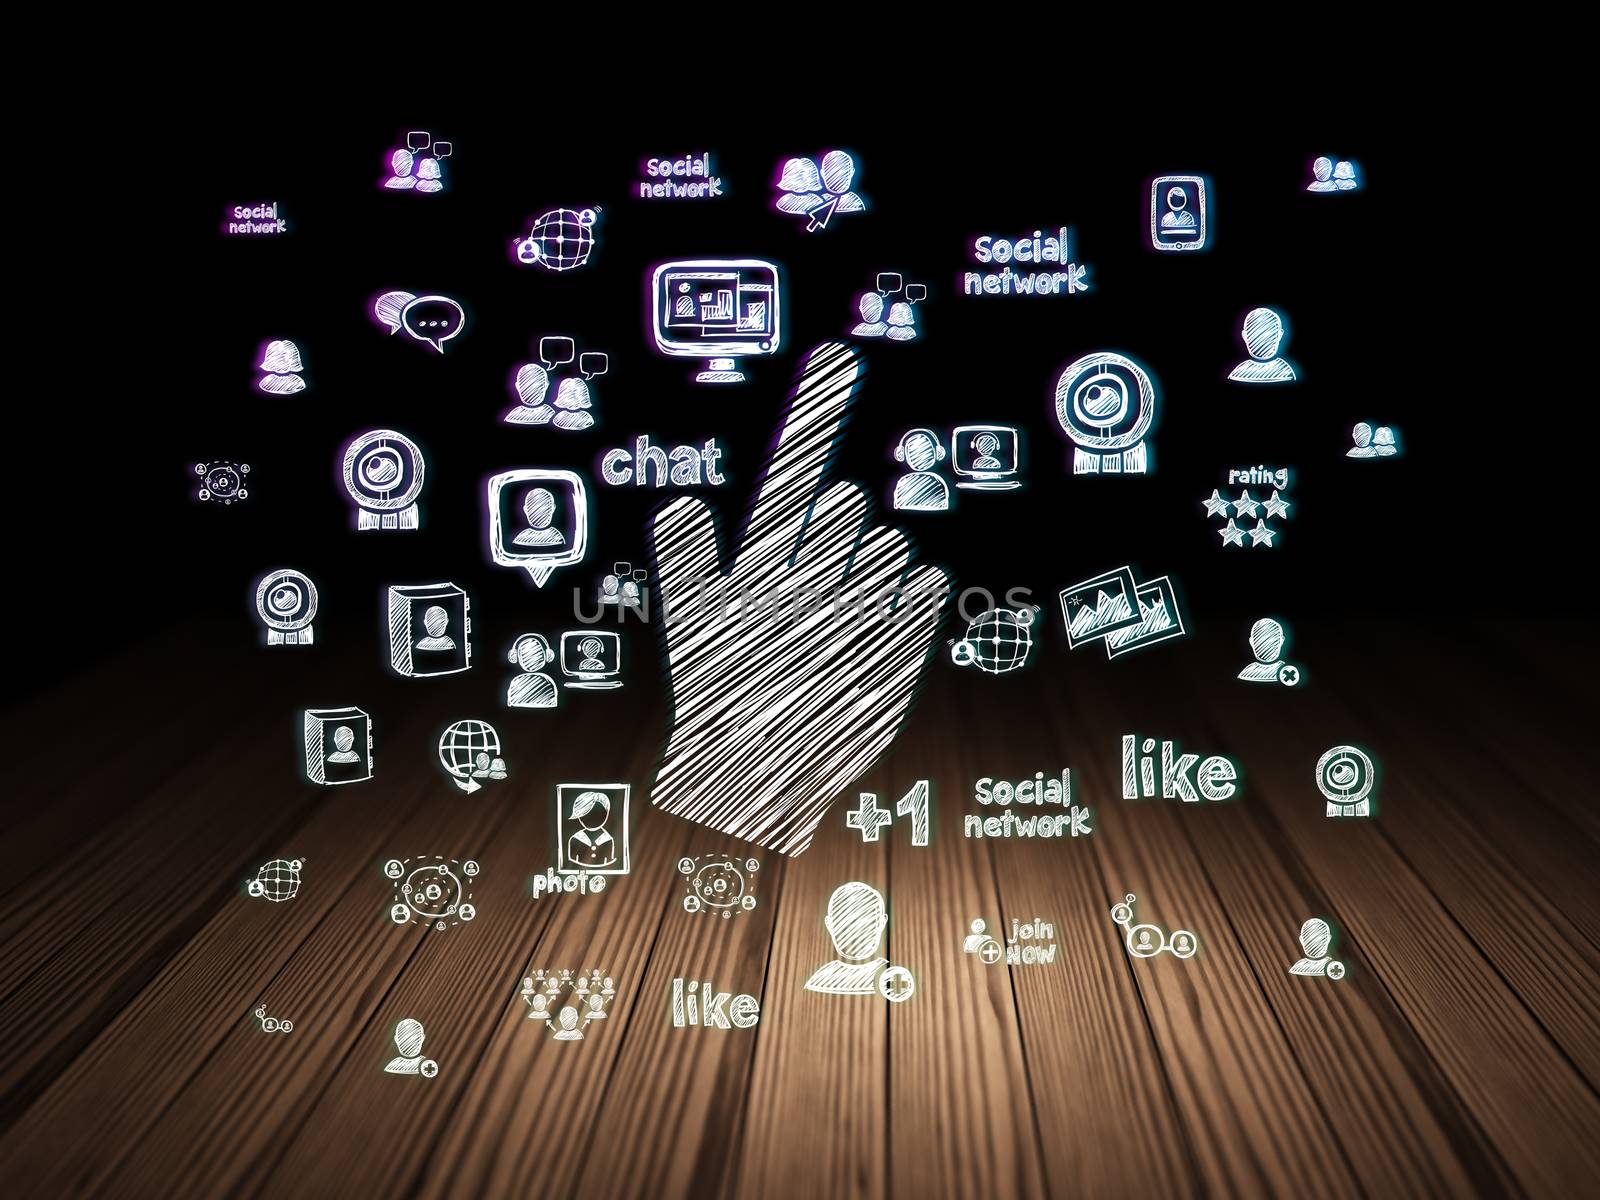 Social media concept: Glowing Mouse Cursor icon in grunge dark room with Wooden Floor, black background with  Hand Drawn Social Network Icons